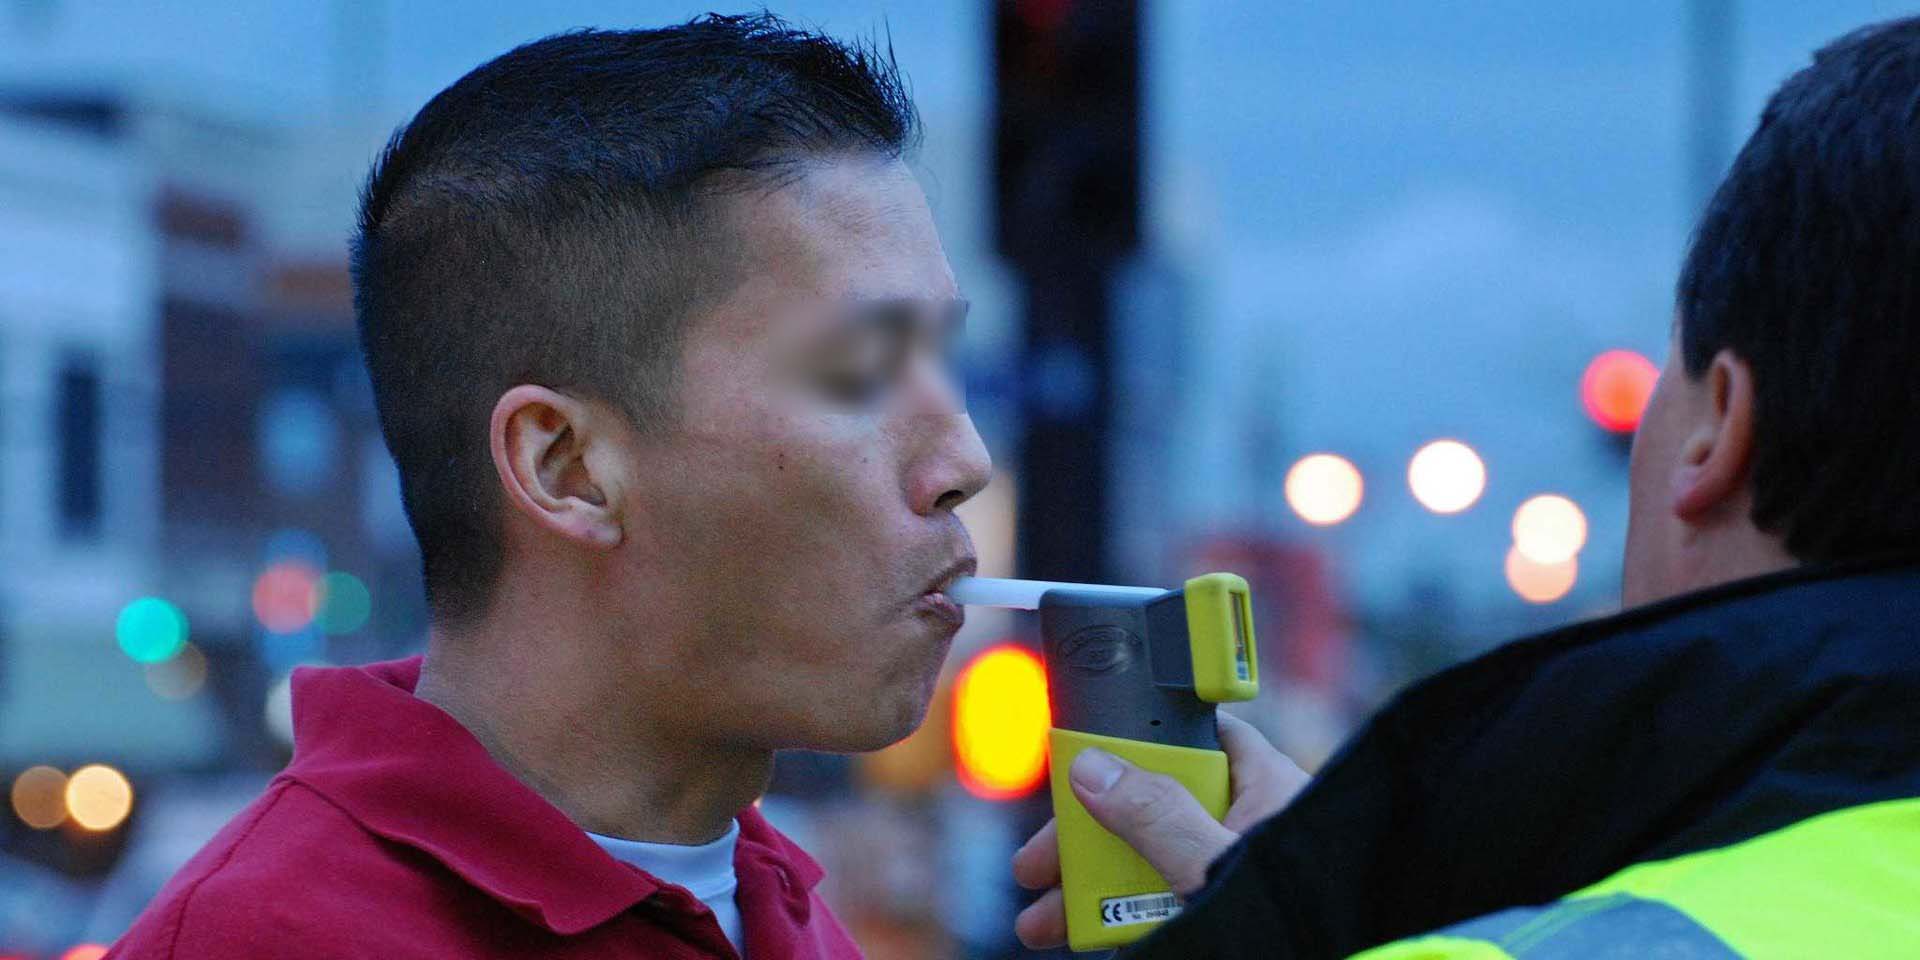 Man Suspected Of Drunk Driving After Failing Breathalyser, Turns Out He Was Just Eating Durian - World Of Buzz